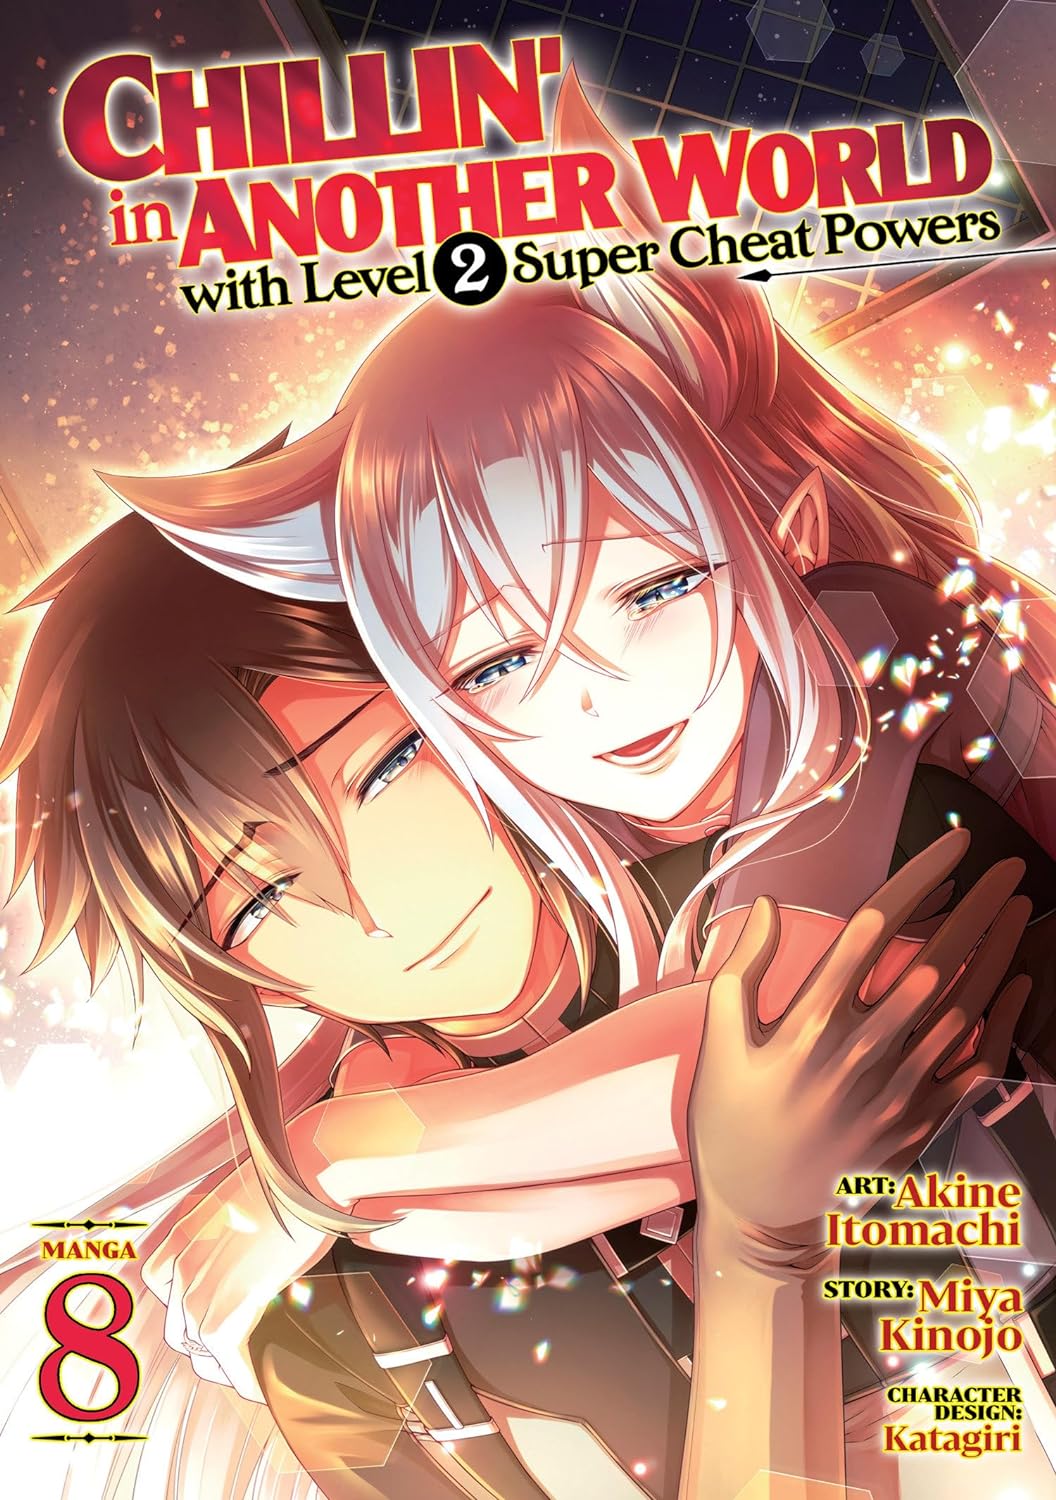 Chillin’ in Another World with Level 2 Super Cheat Powers (Manga) Vol. 08